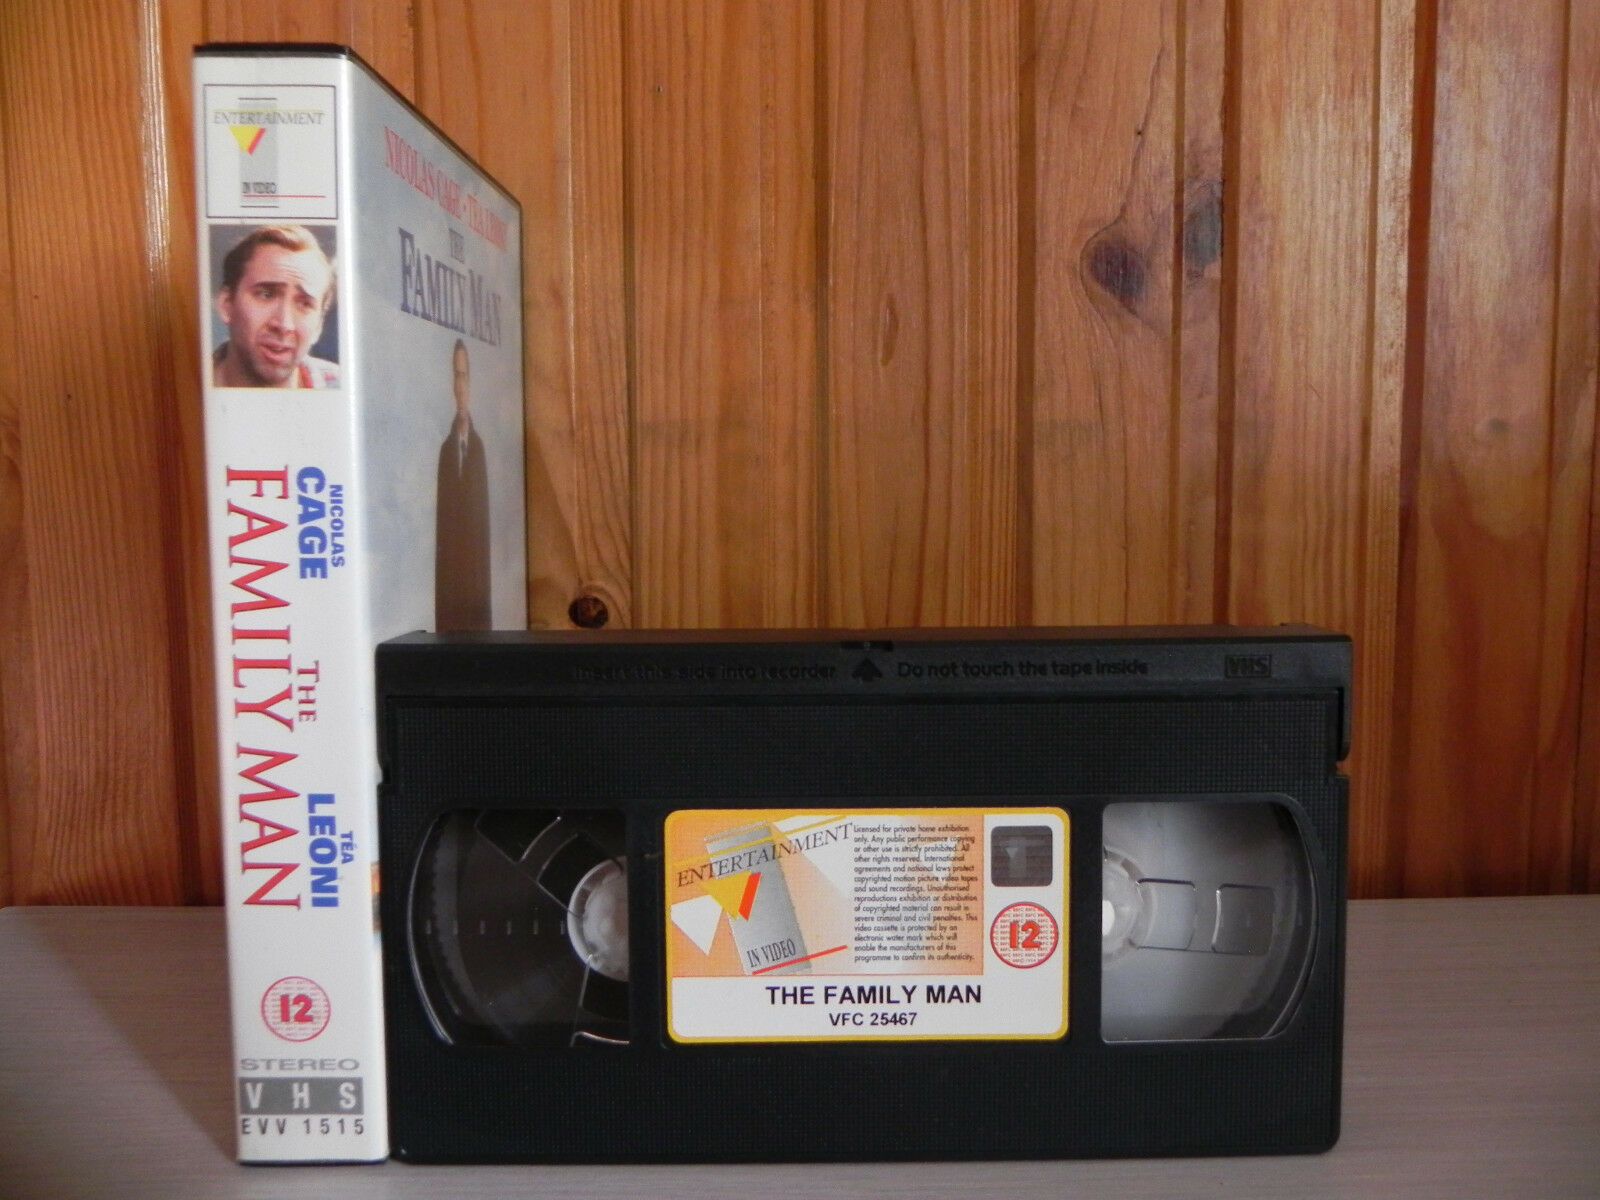 THE FAMILY MAN - Entertainment Video - Nicolas Cage - 120 Mins Of Comedy - VHS-